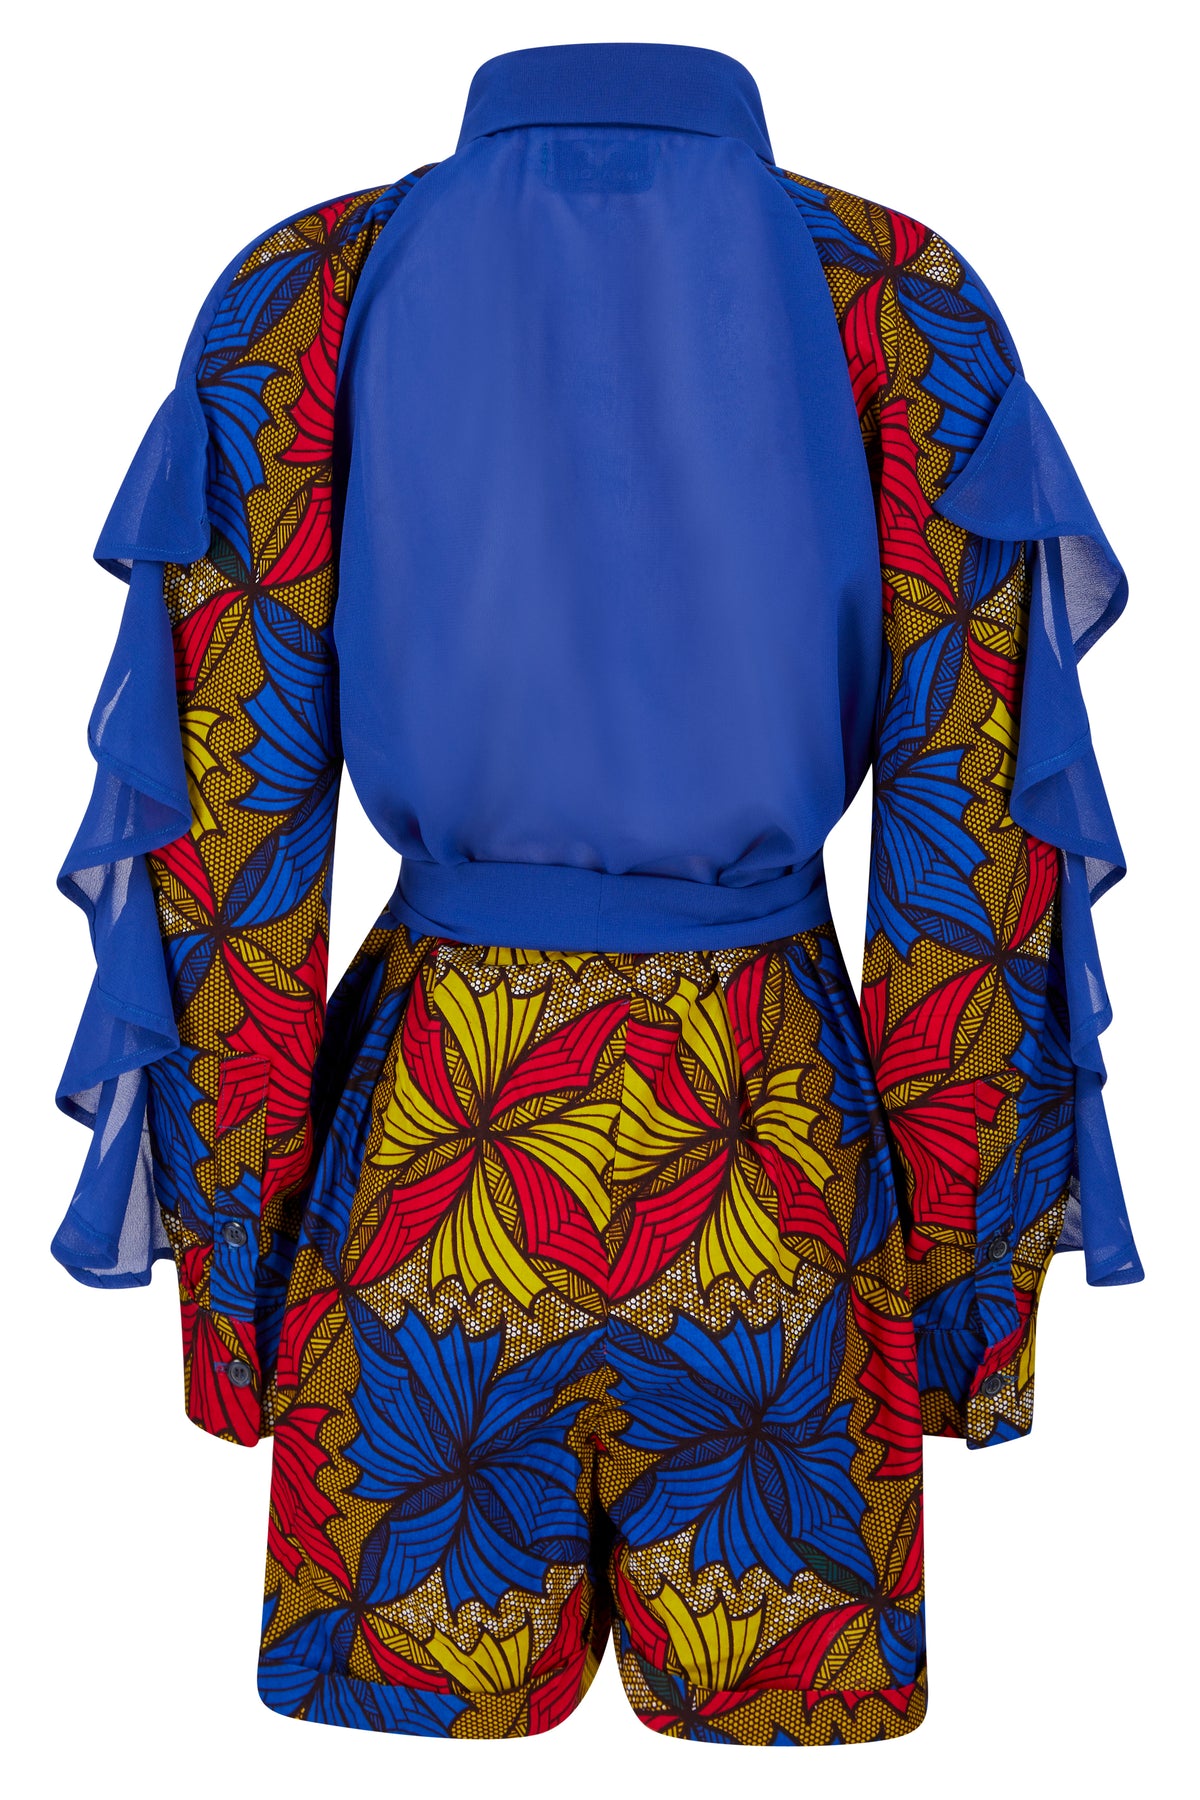 Linda African Print Playsuit - OHEMA OHENE AFRICAN INSPIRED FASHION